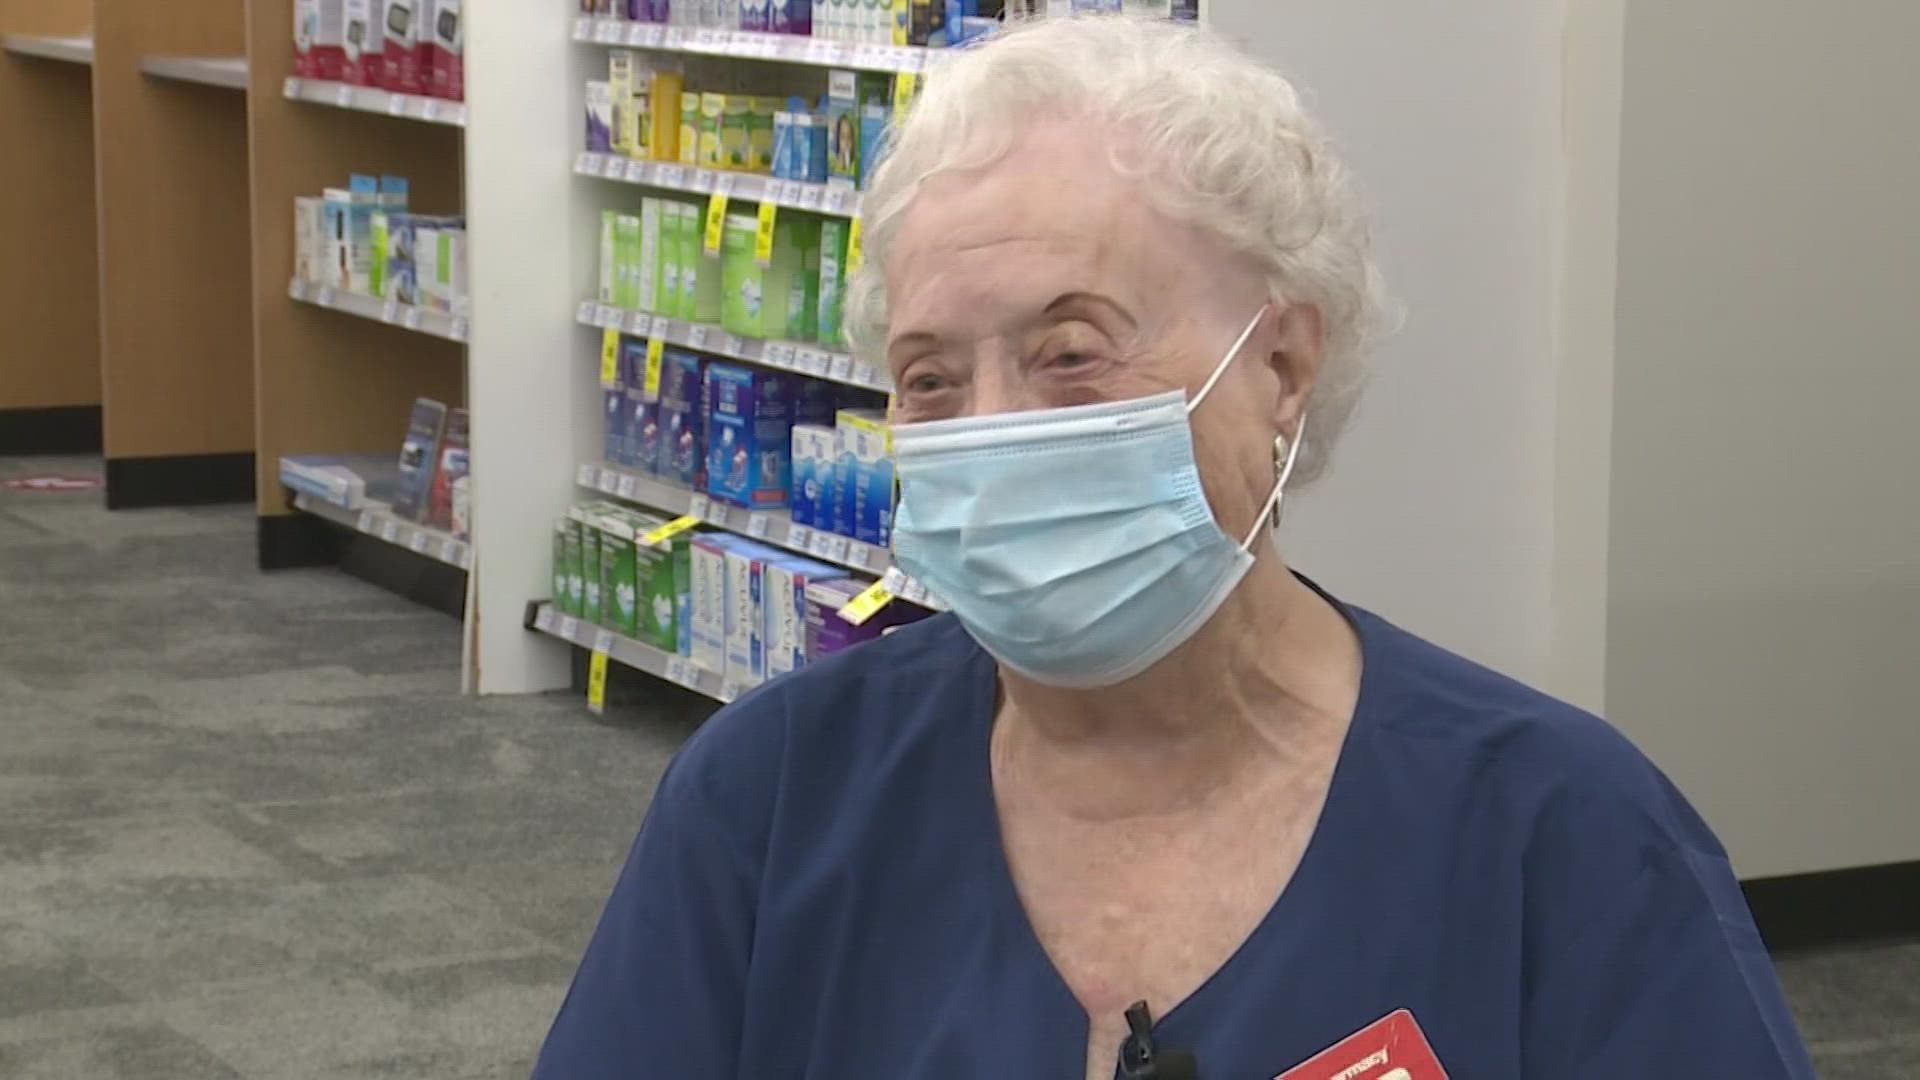 “I like working with people, helping people. I like the people I work with," Mary Jo Nolen said after 62 years as a pharmacy technician.